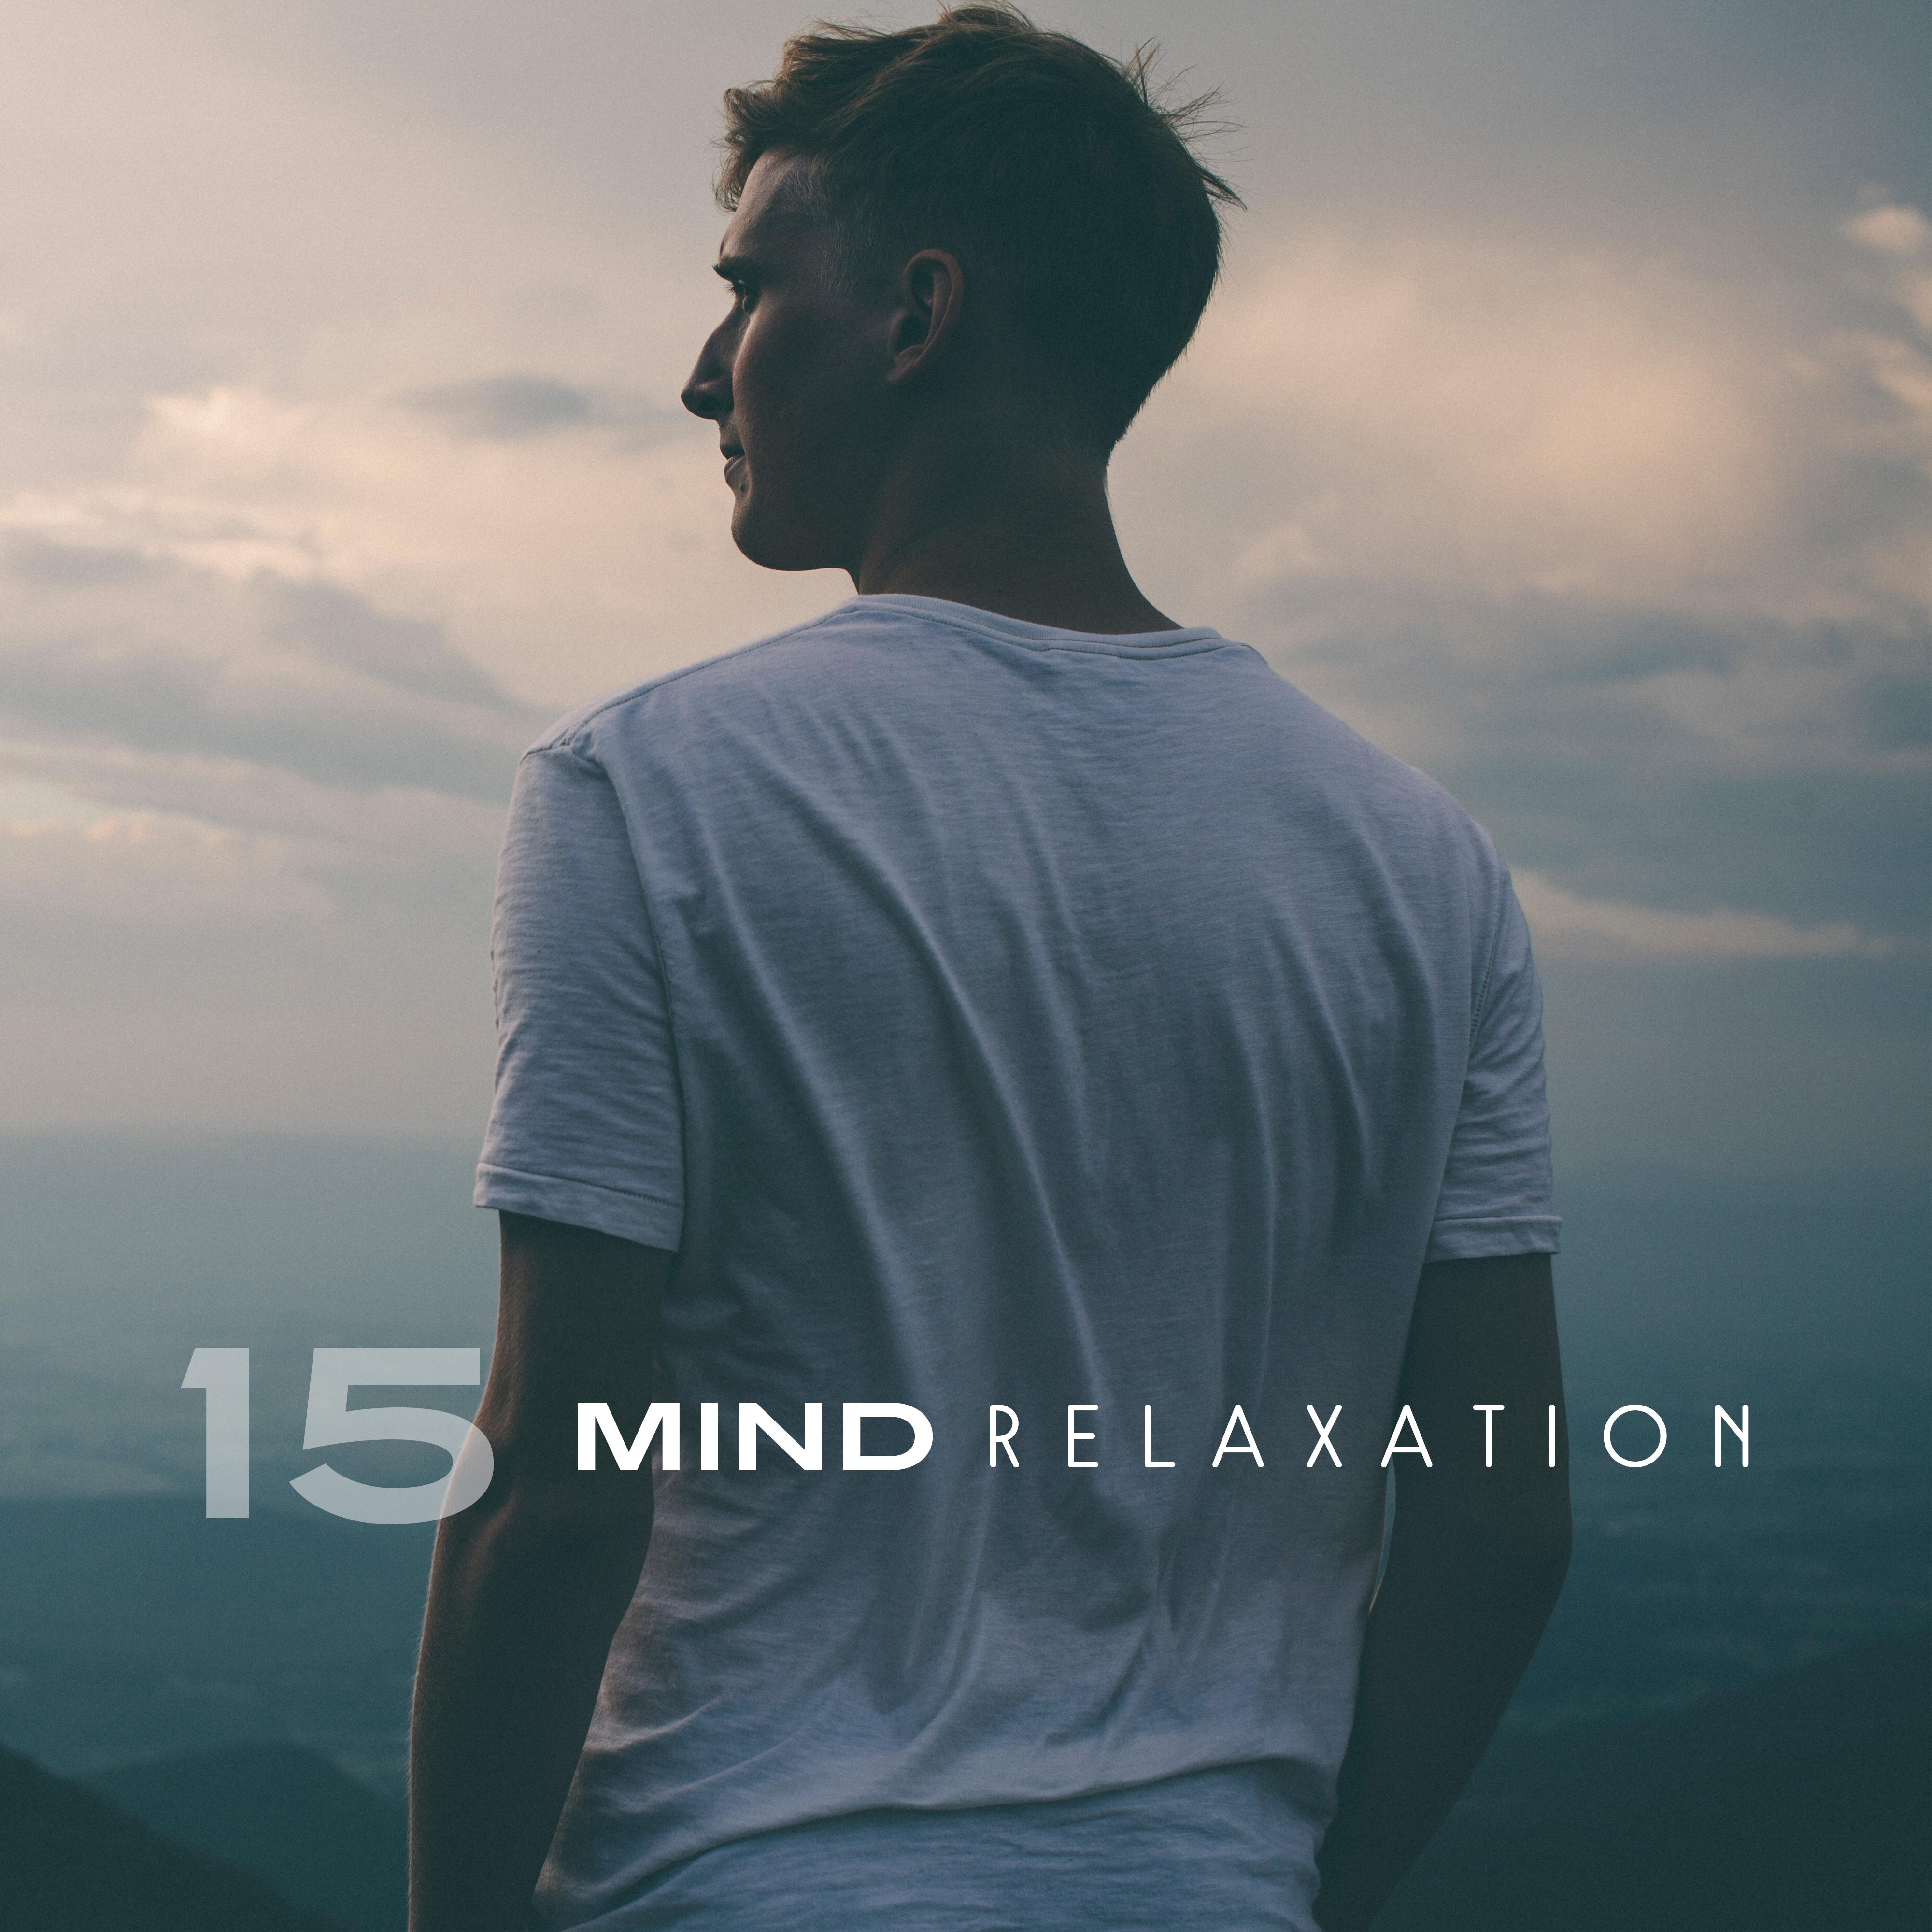 15 Mind Relaxation